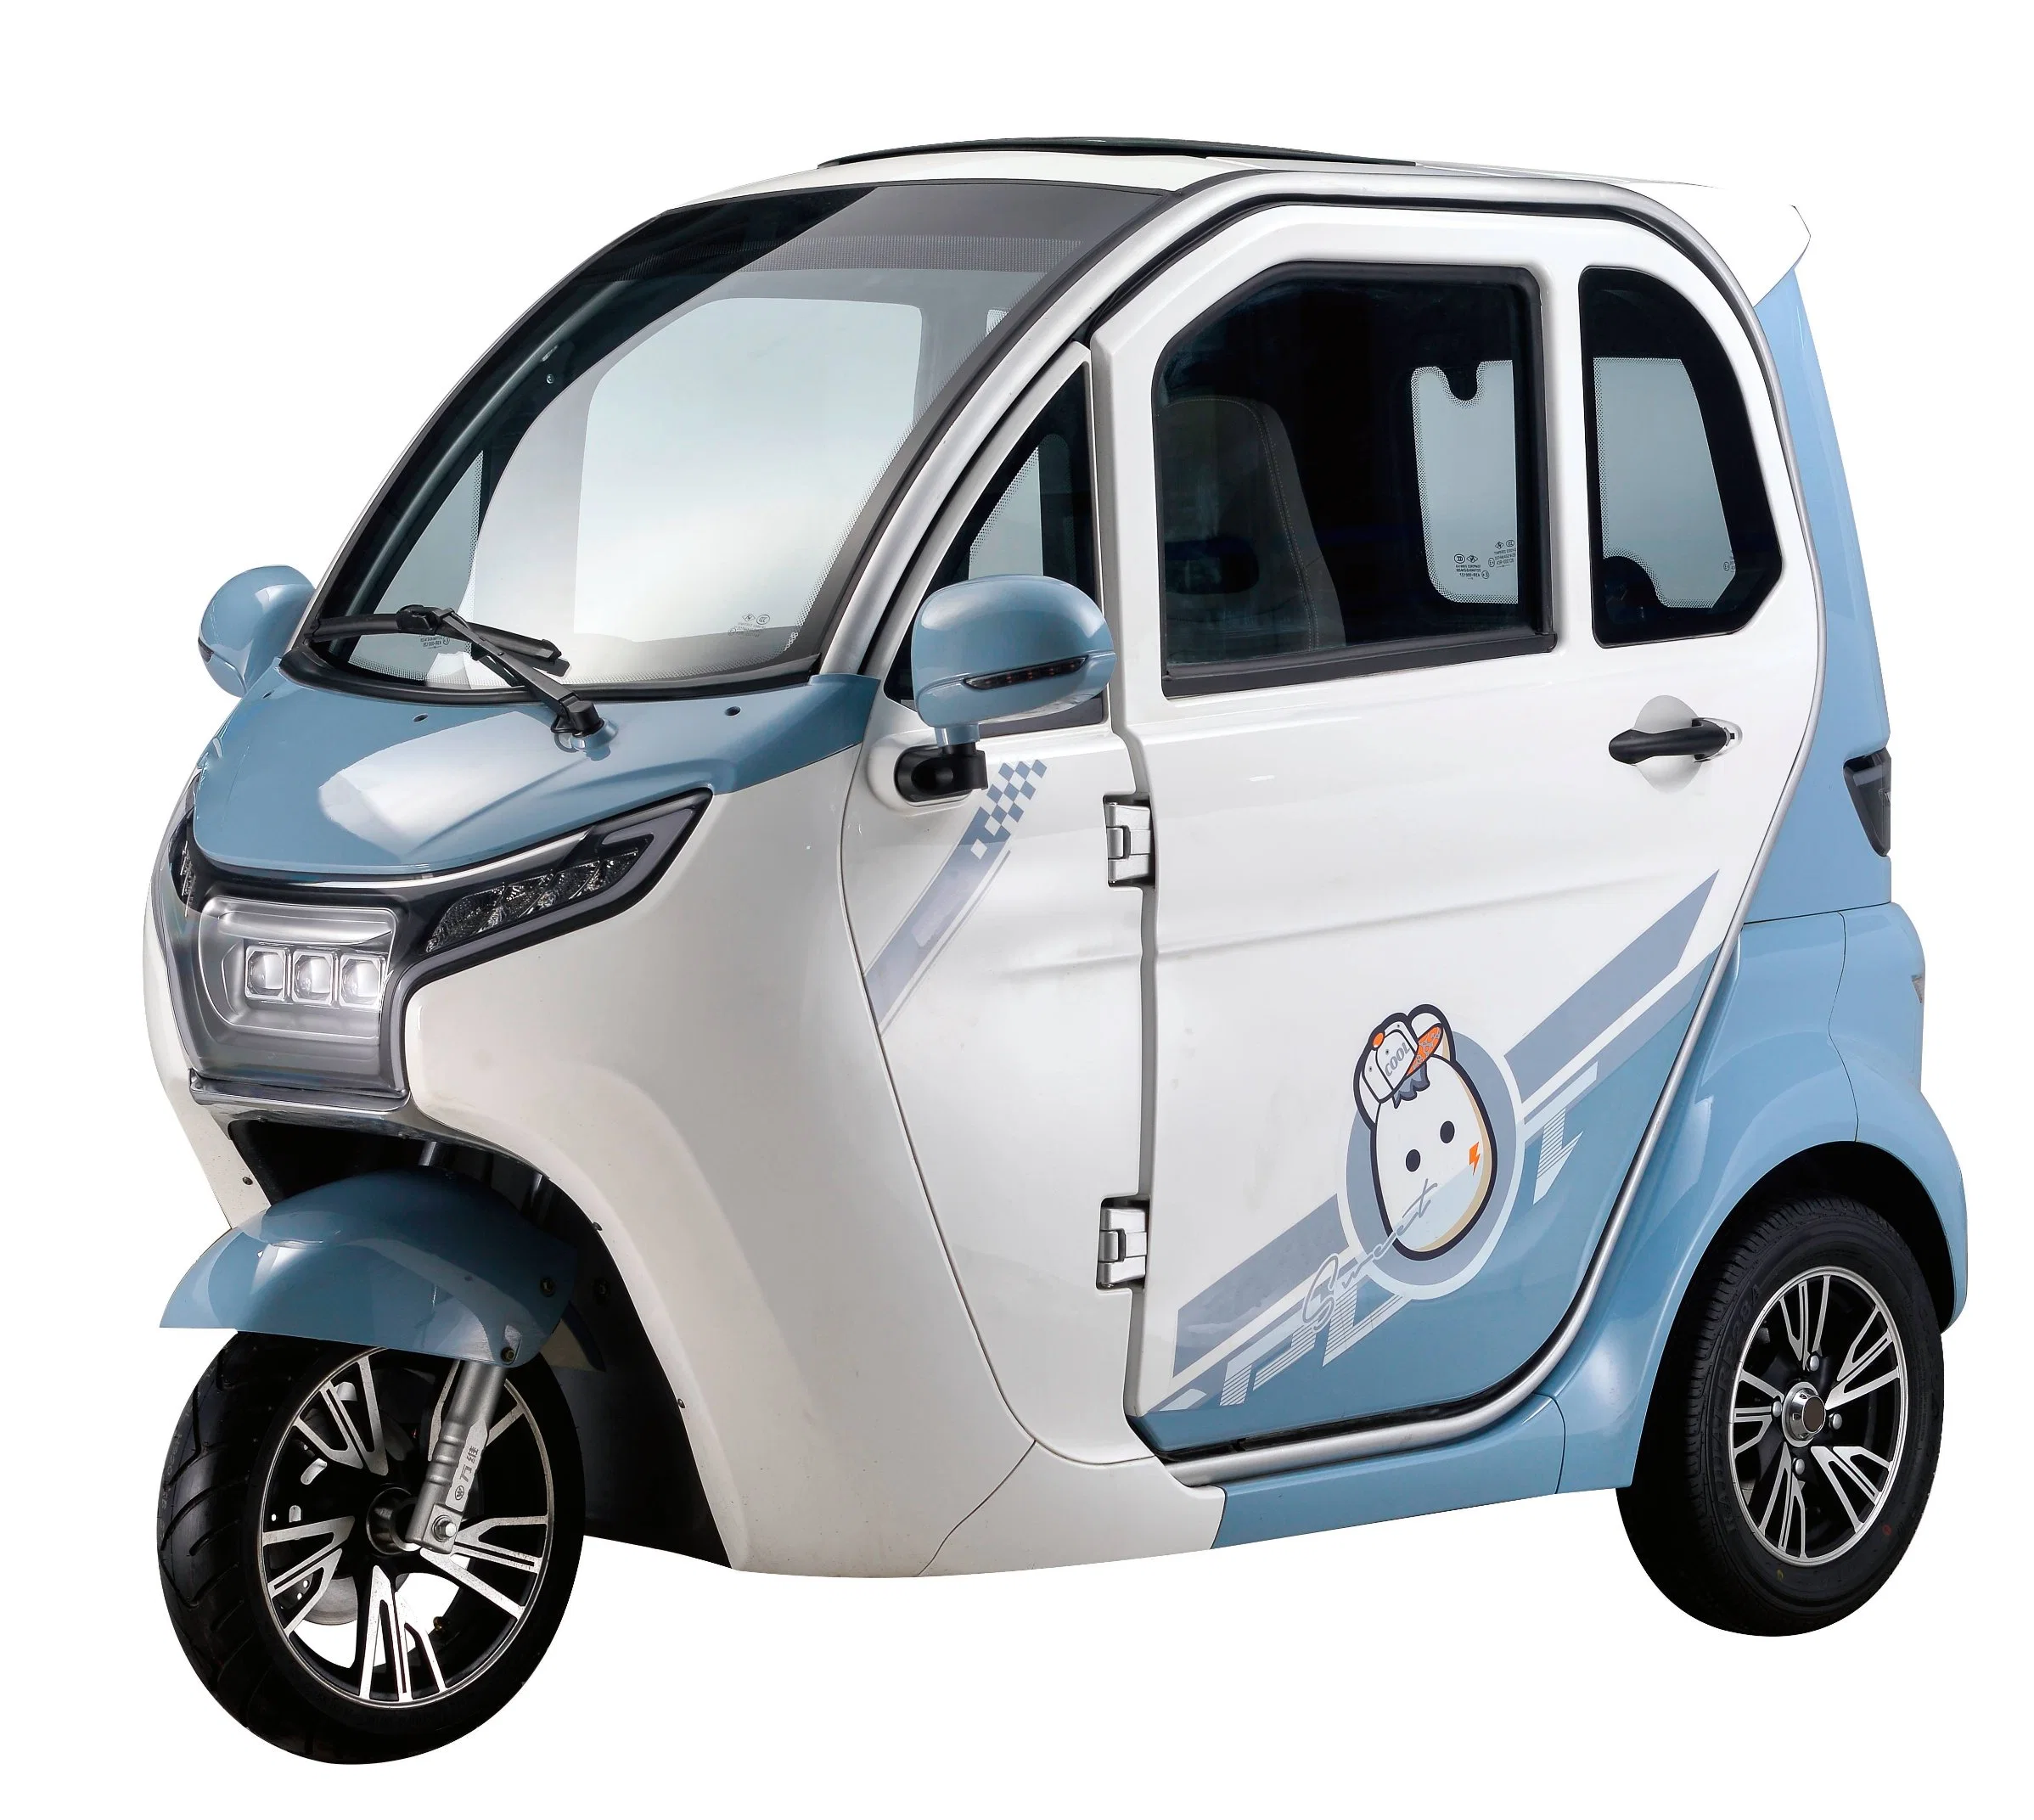 3 Wheel Electric Motorcycle Car with Drive Cabin/Electric Scooter Enclosed with Passenger Seat/Cargo Tricycle for Adults